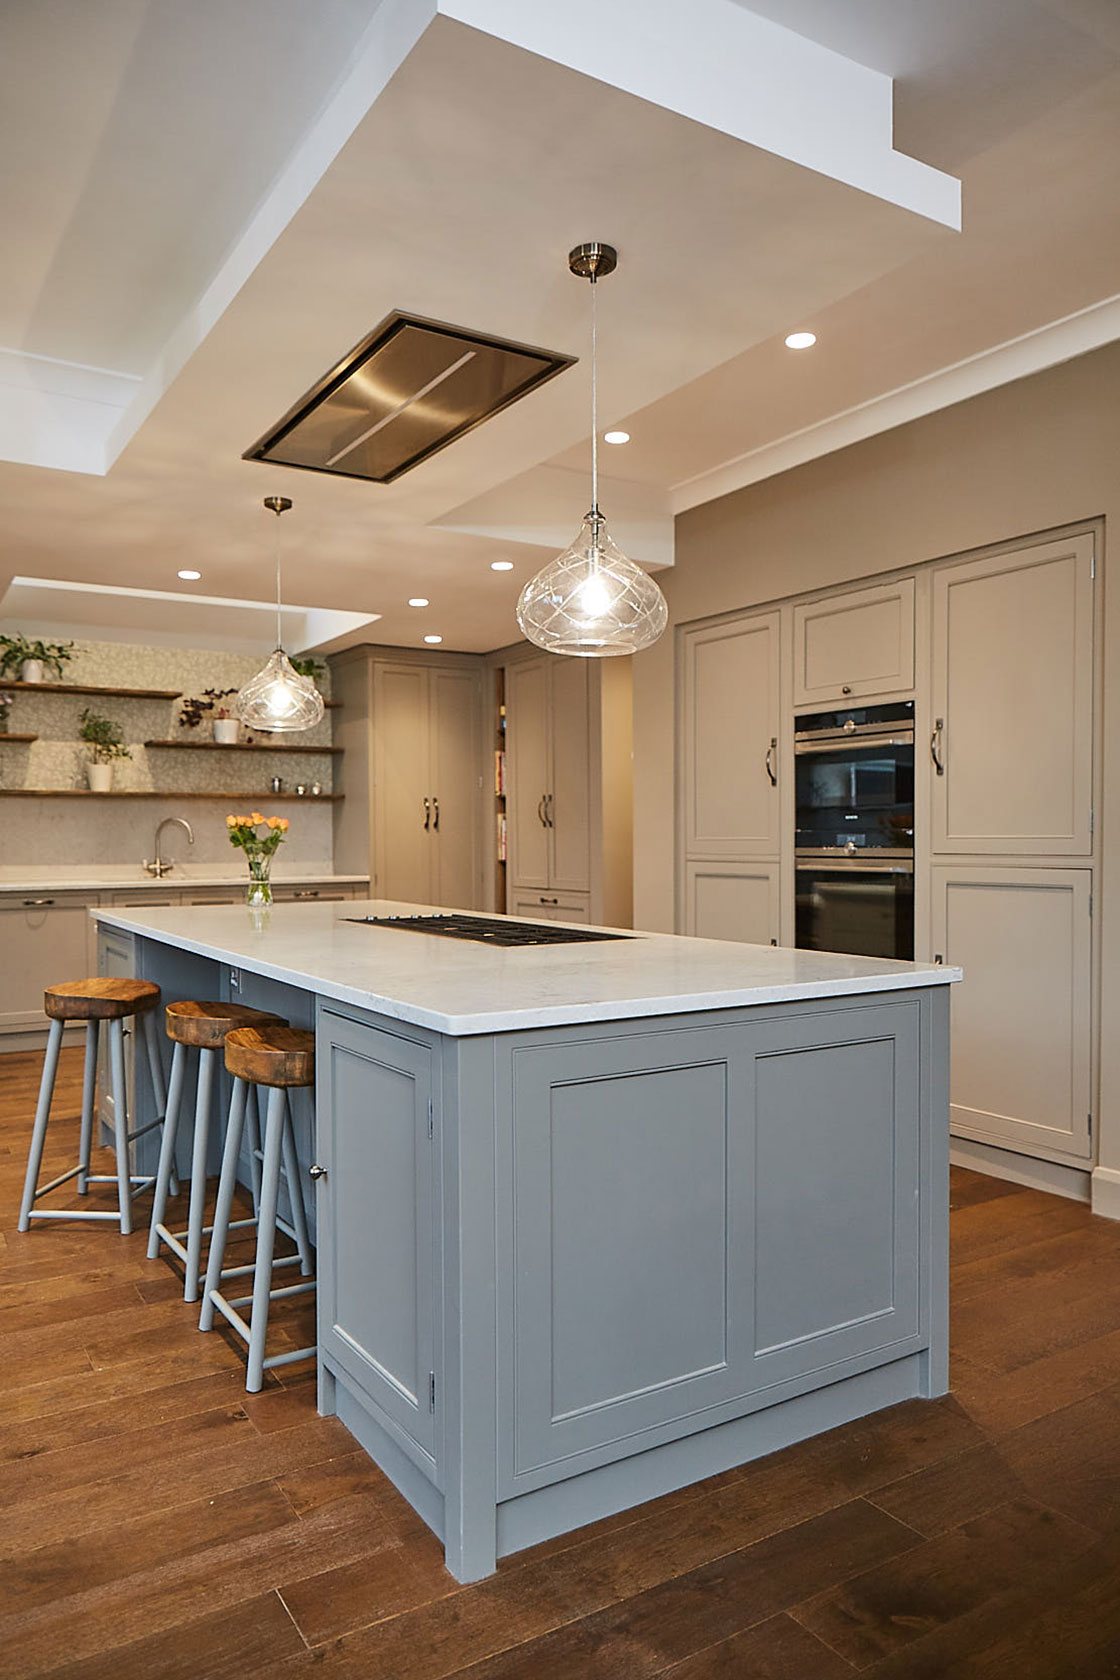 Kitchen island with flush extractor in ceiling